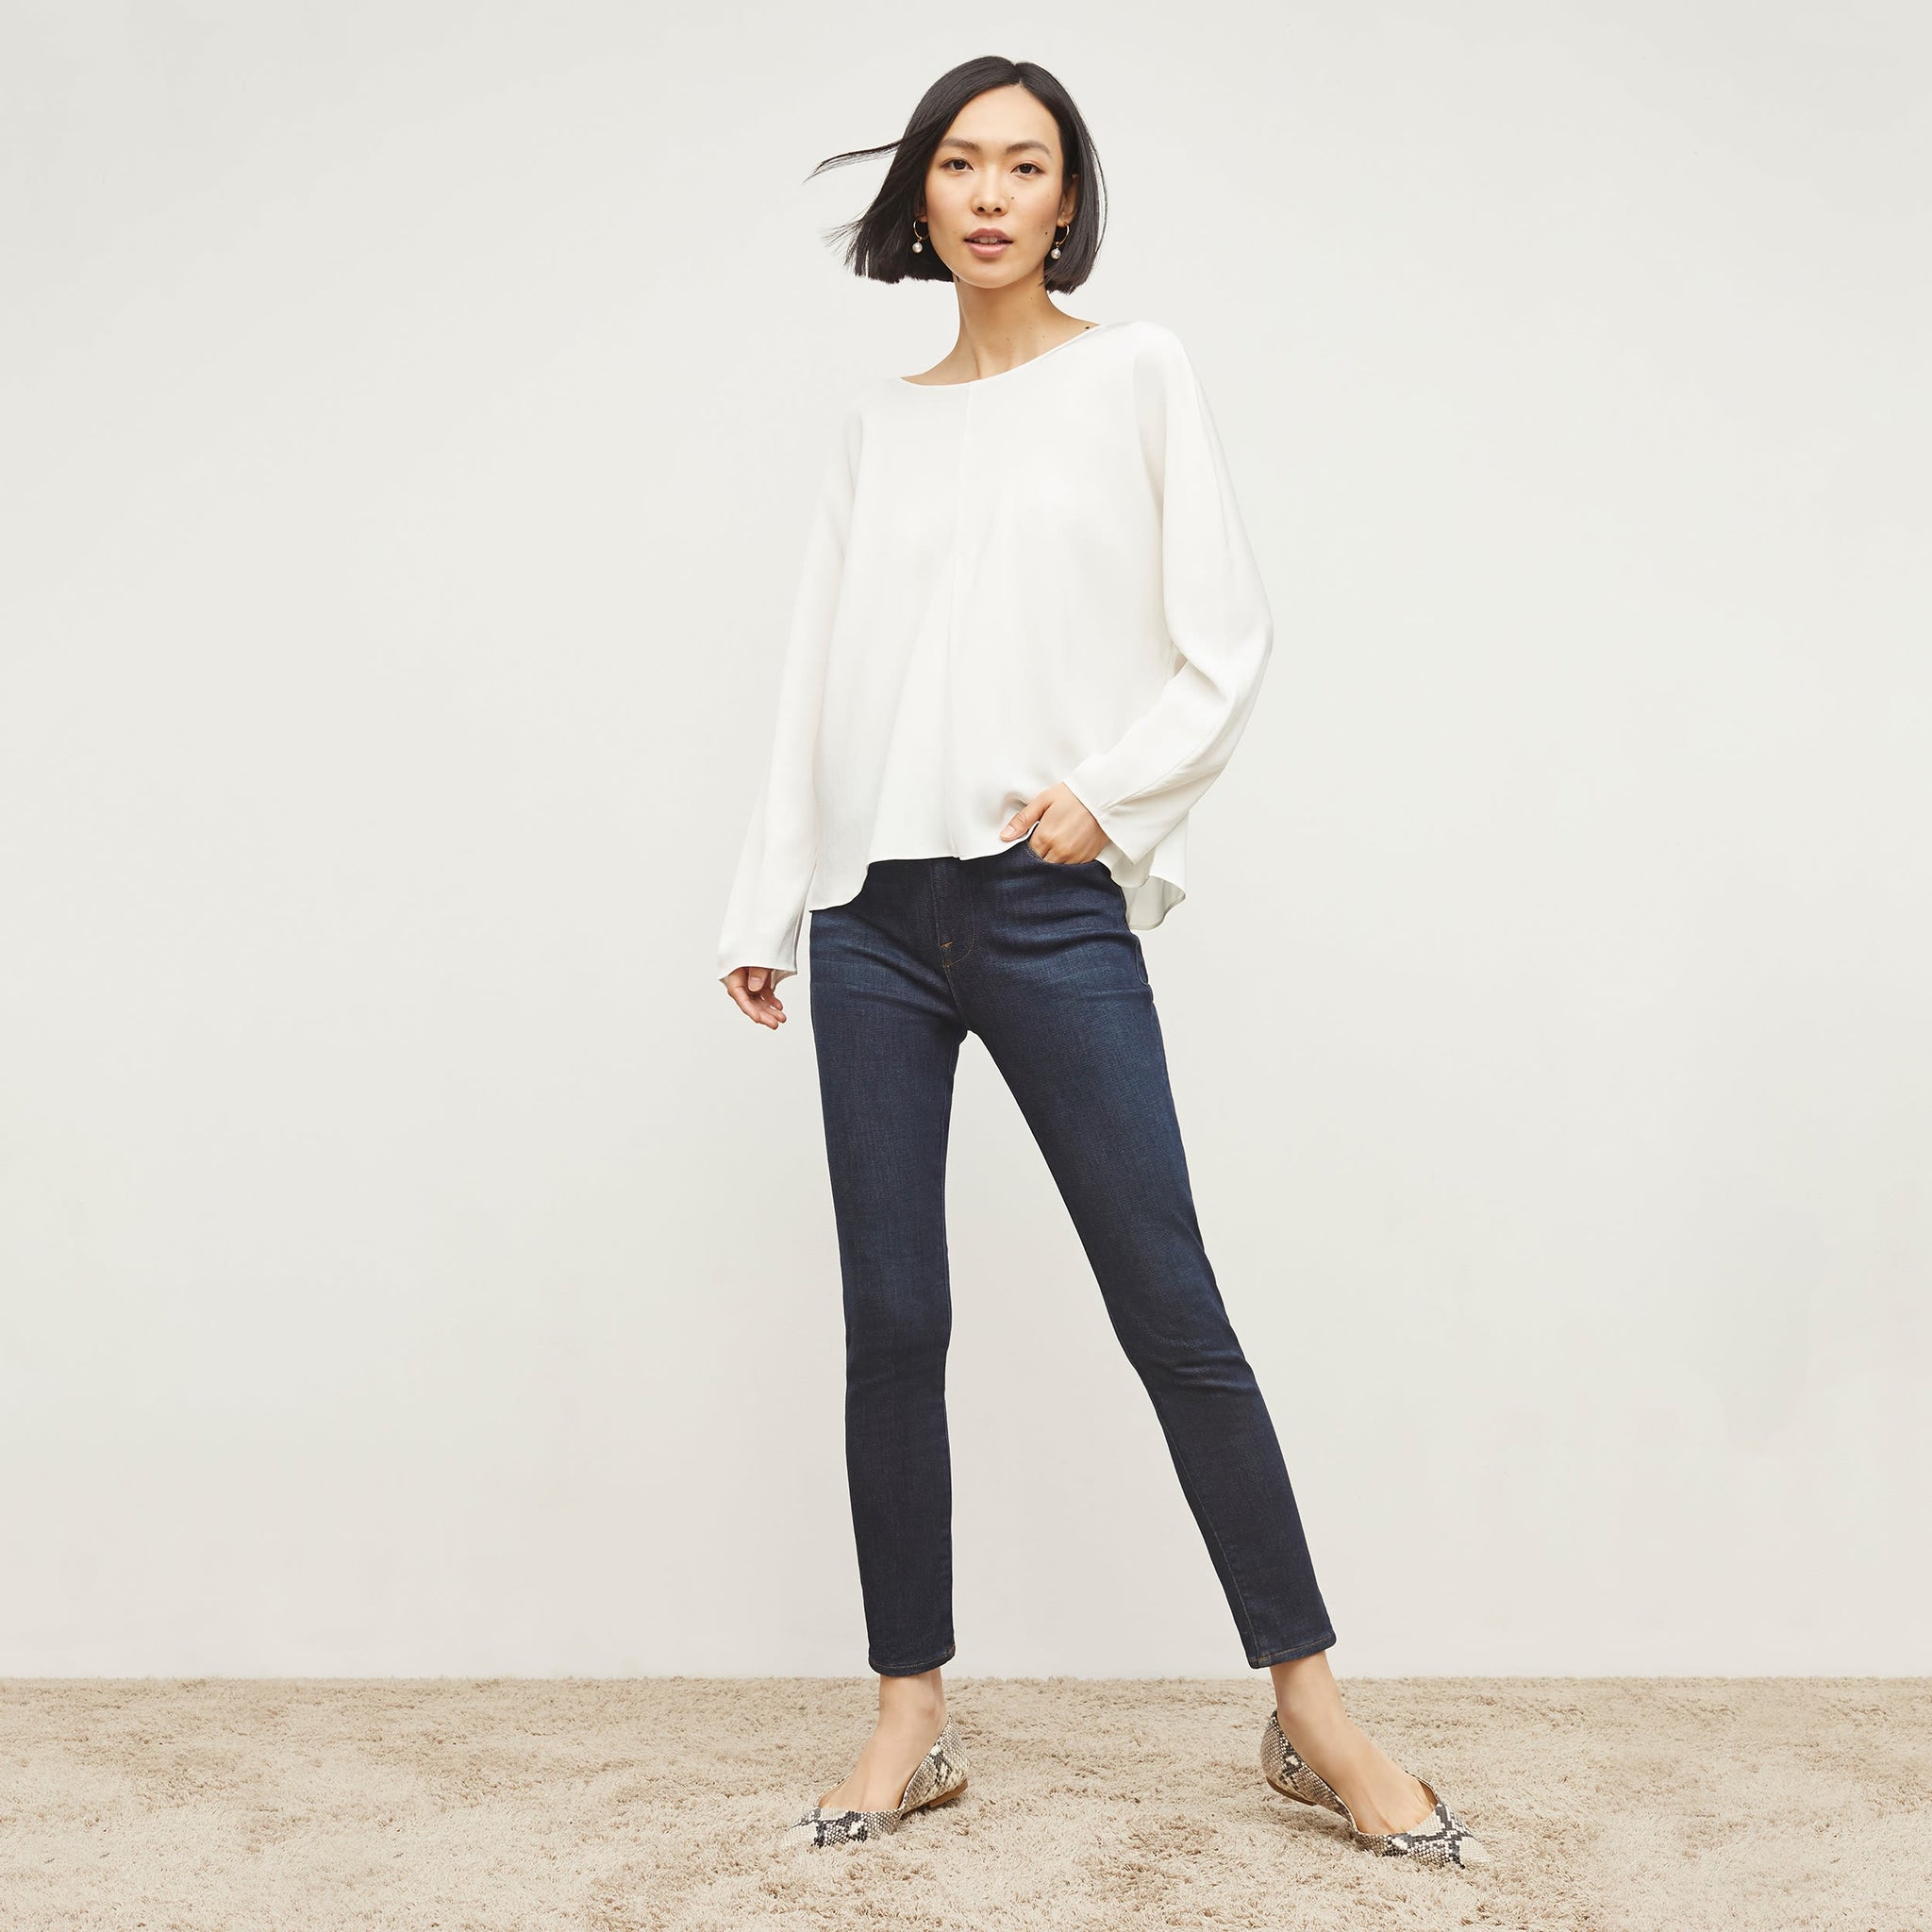 Front image of a woman standing wearing the FRAME Denim Le High Skinny Crop Jean in Samira 